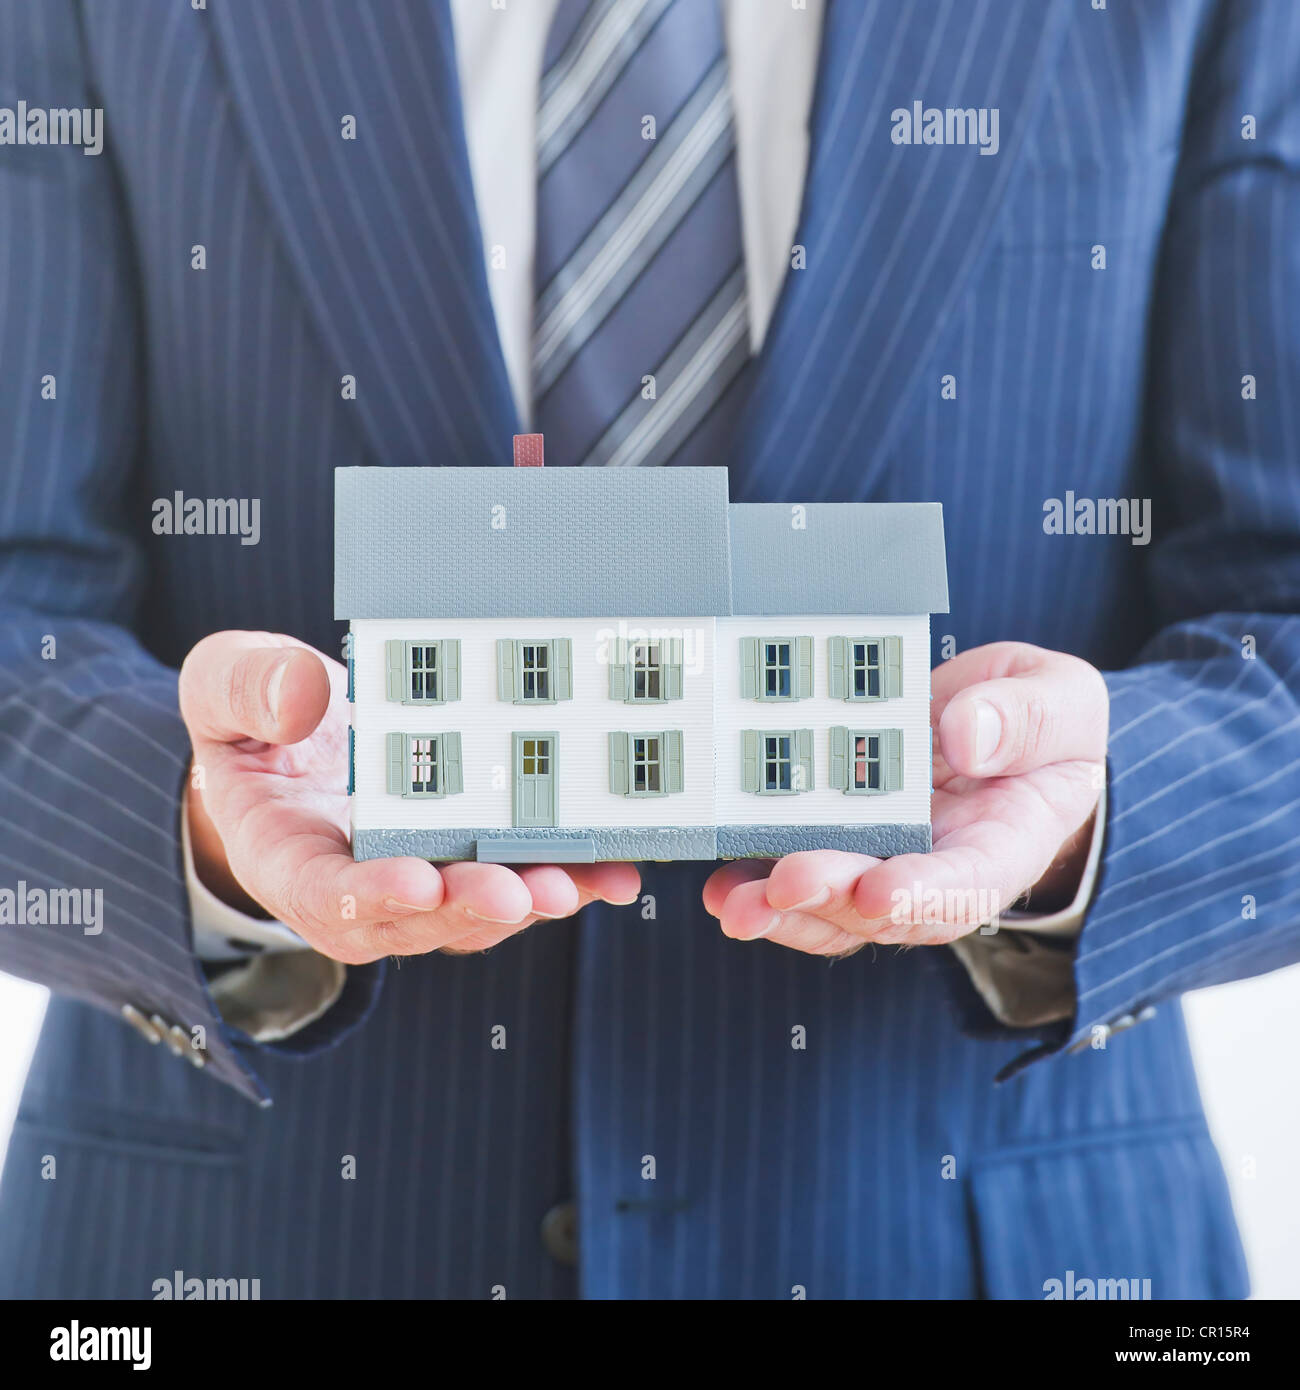 Man wearing suit holding small house model Stock Photo